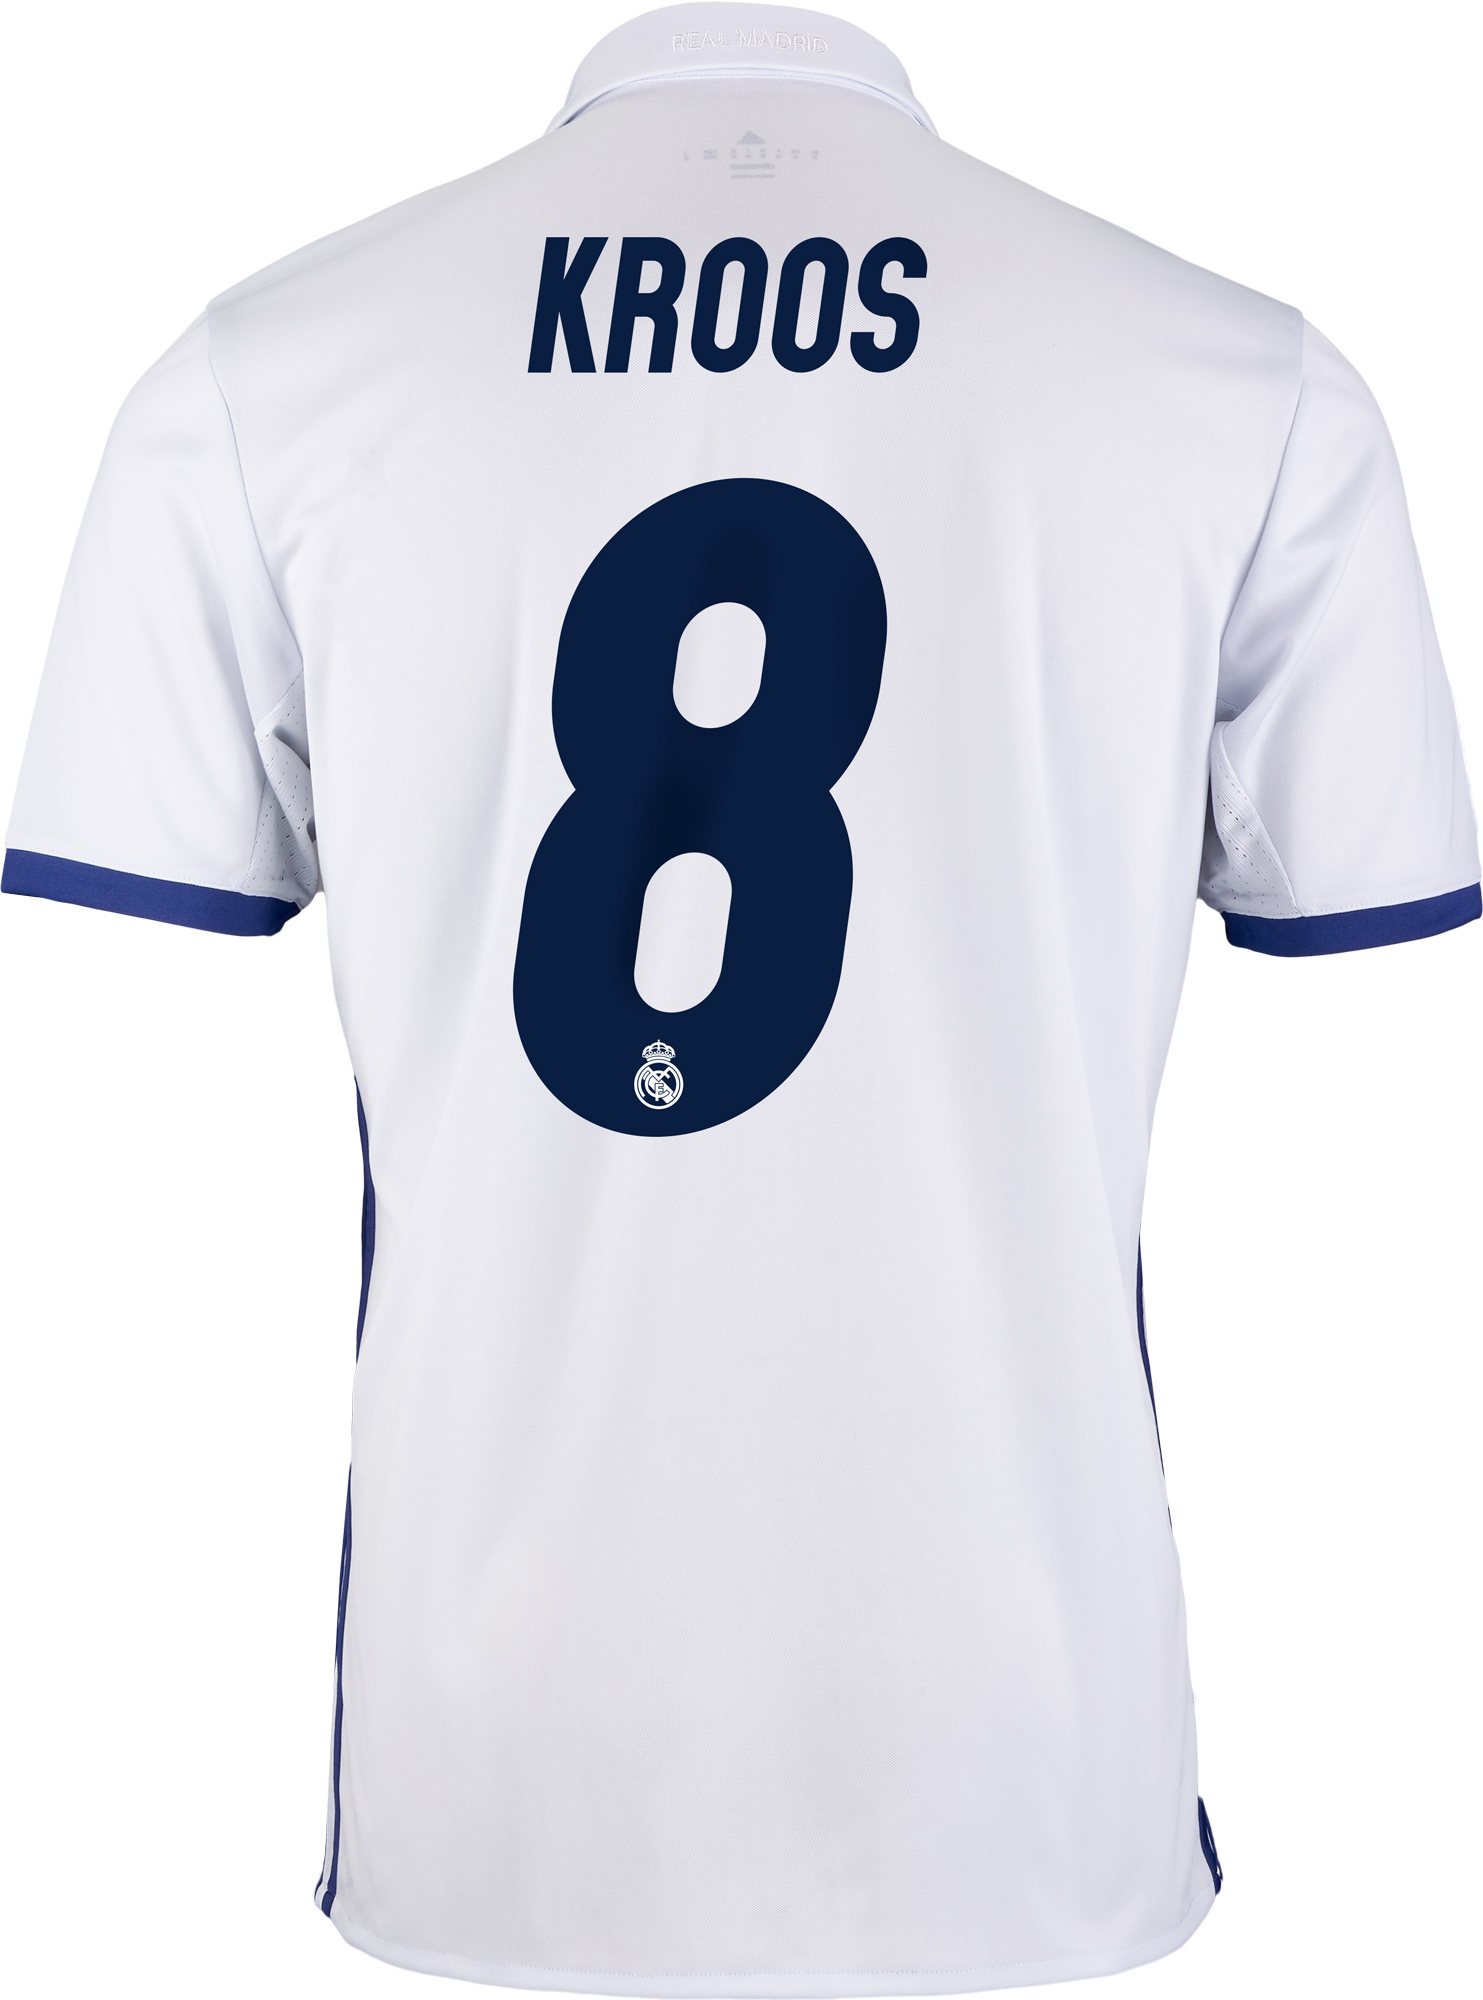 Kroos Youth Real Madrid Jersey - 2016-17 Real Madrid Jerseys